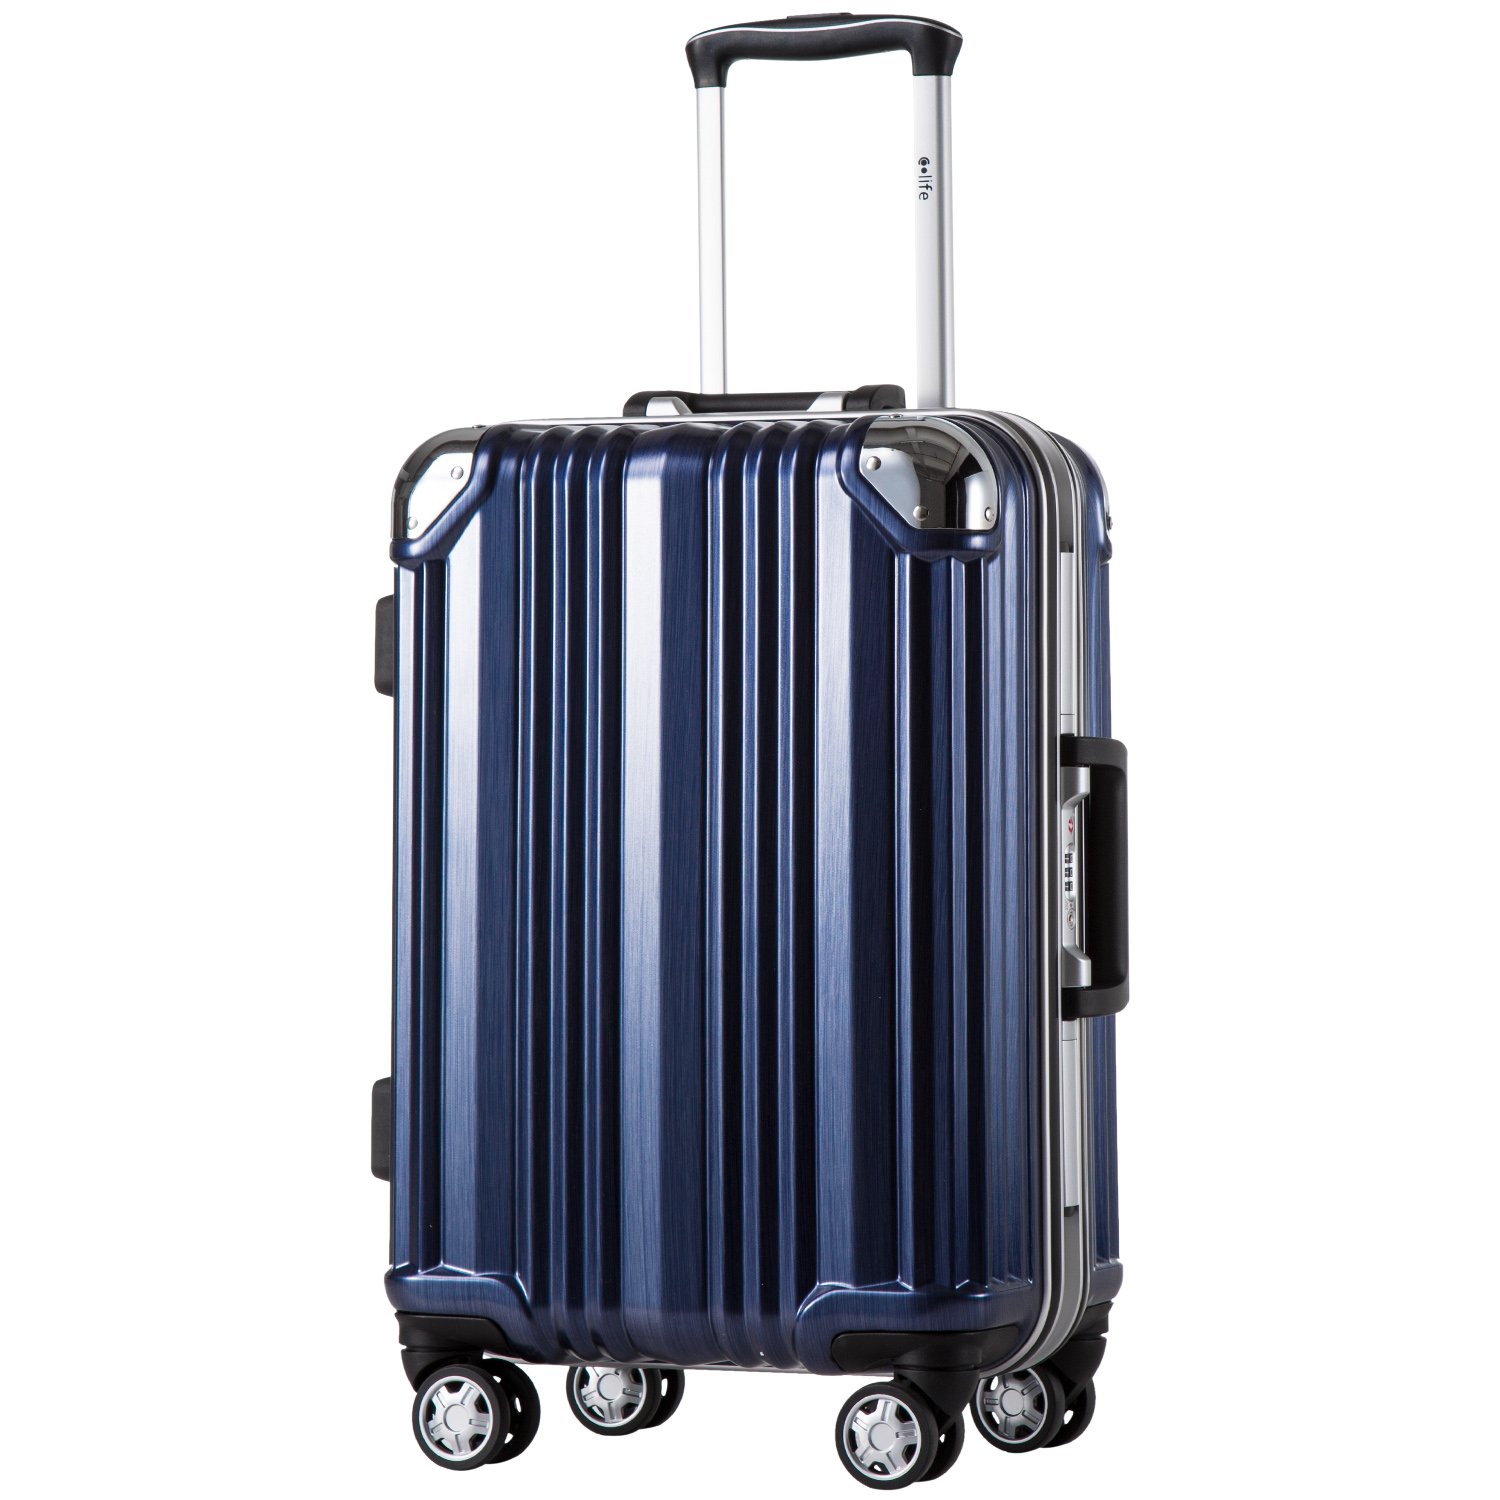 coolife Luggage Aluminium Frame Suitcase TSA Lock 100%Pc 20in 24in 28in (Blue, L(28in))